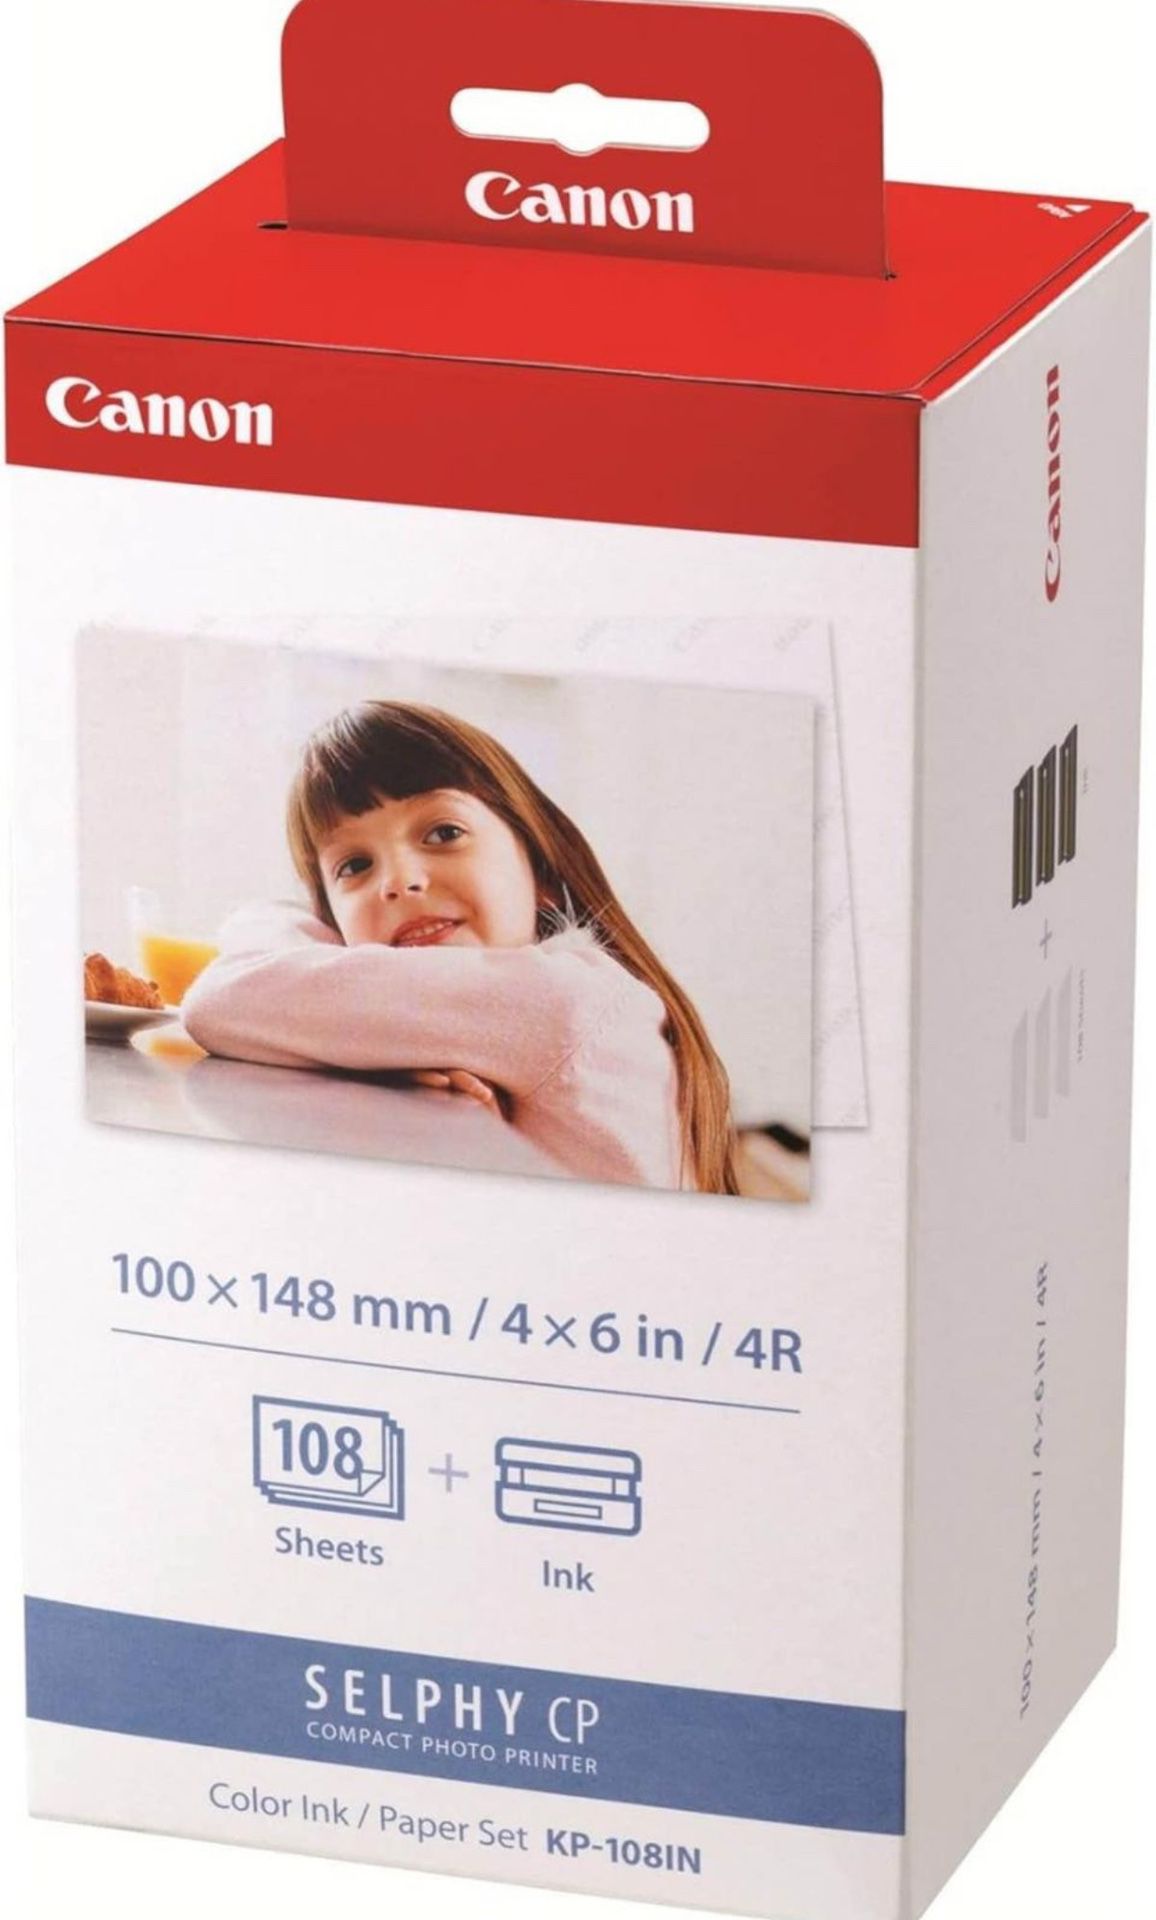 Canon KP-108IN Color Ink/Paper Set